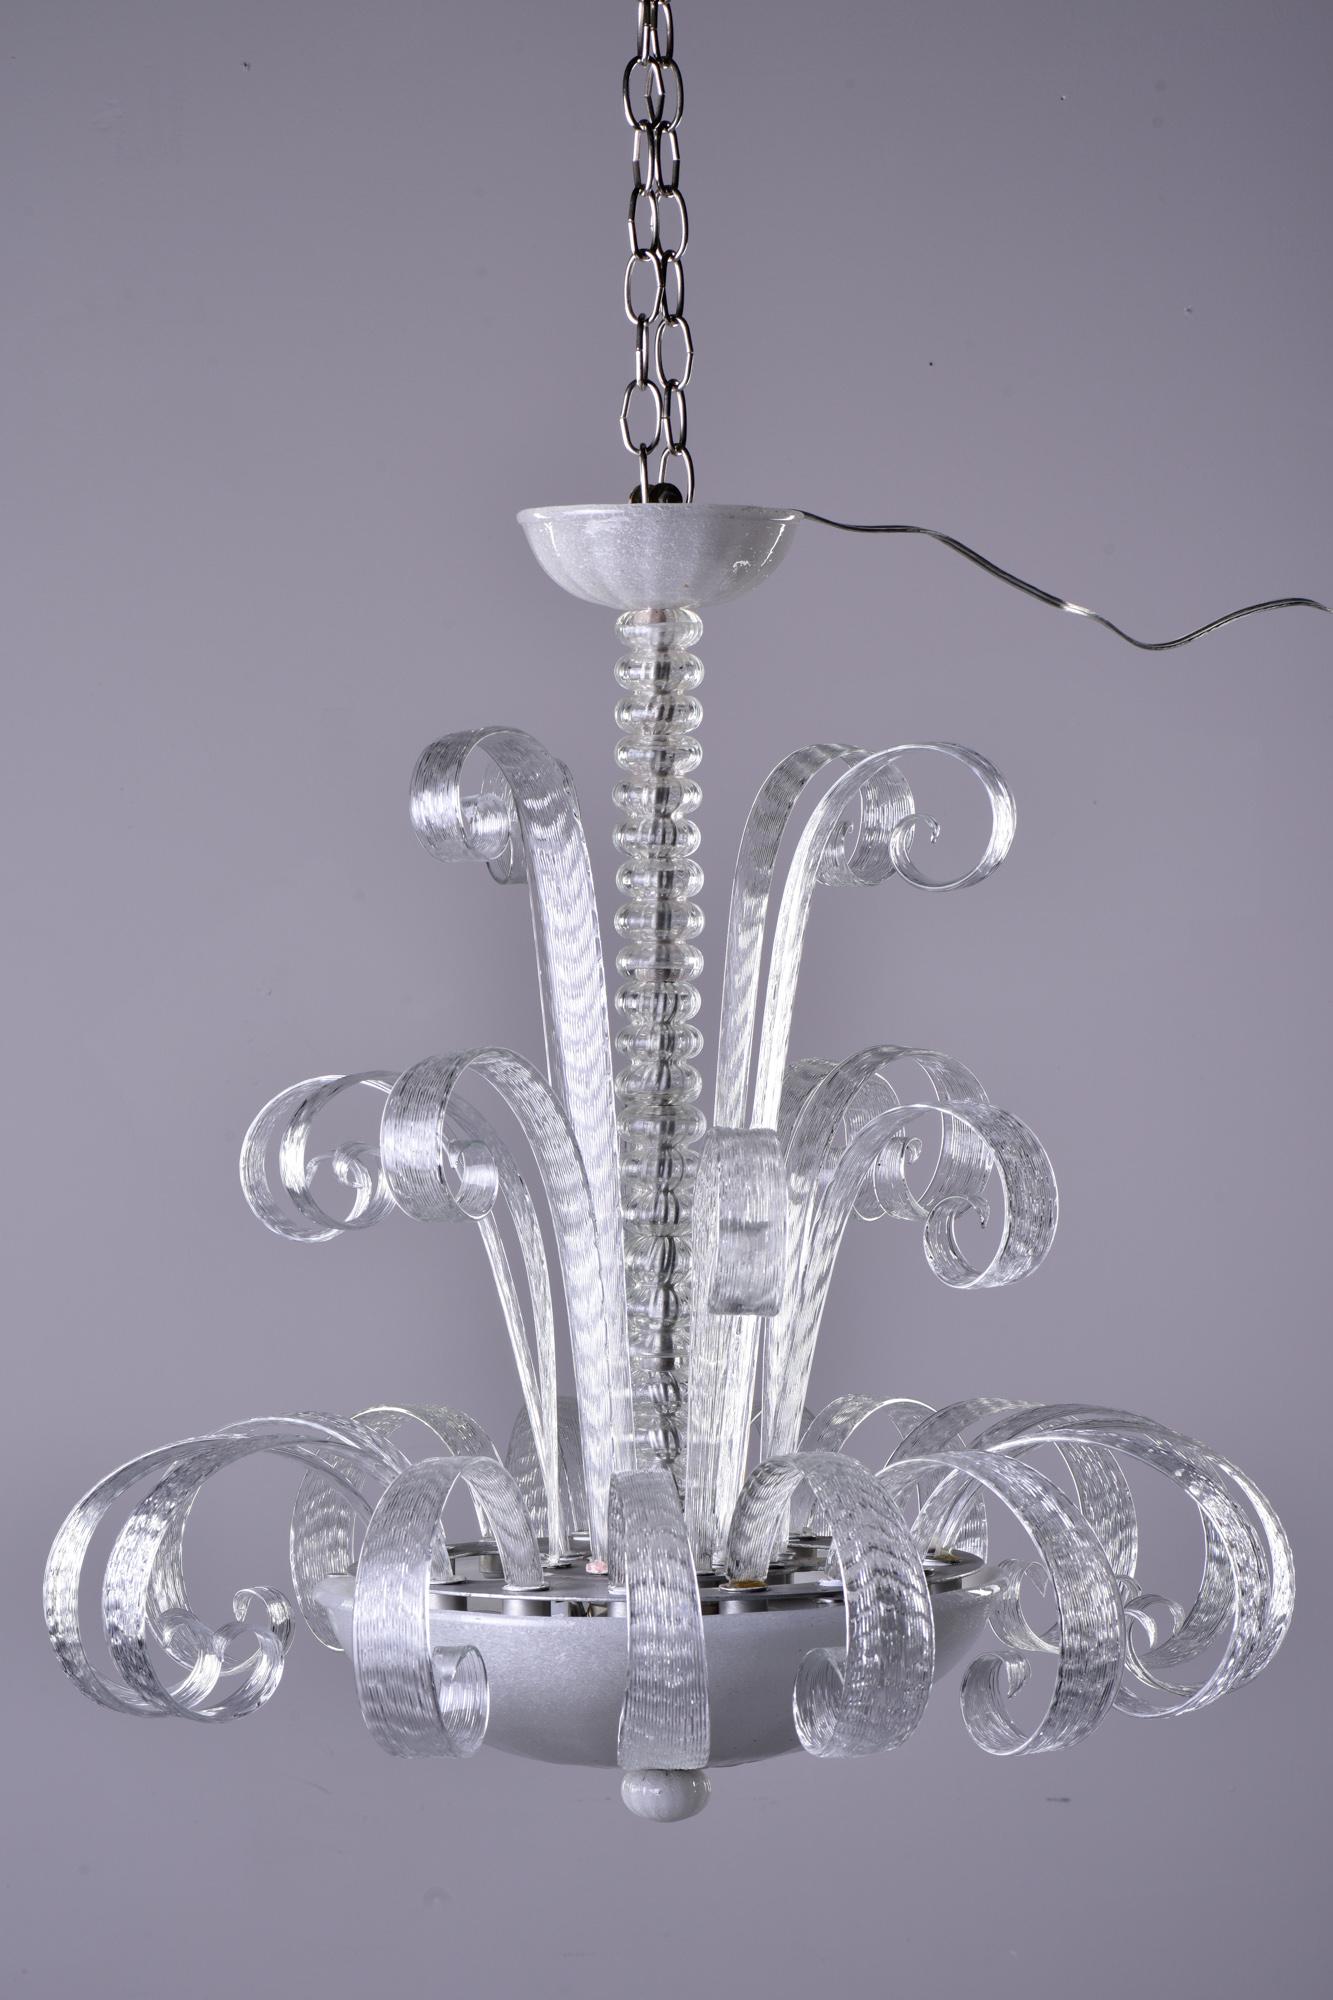 Circa 1940s clear Murano glass chandelier features a center bowl with four sockets and three tiers of curvy glass stems and a glass ceiling canopy. Unknown Murano maker. Rewired for US electrical standards.